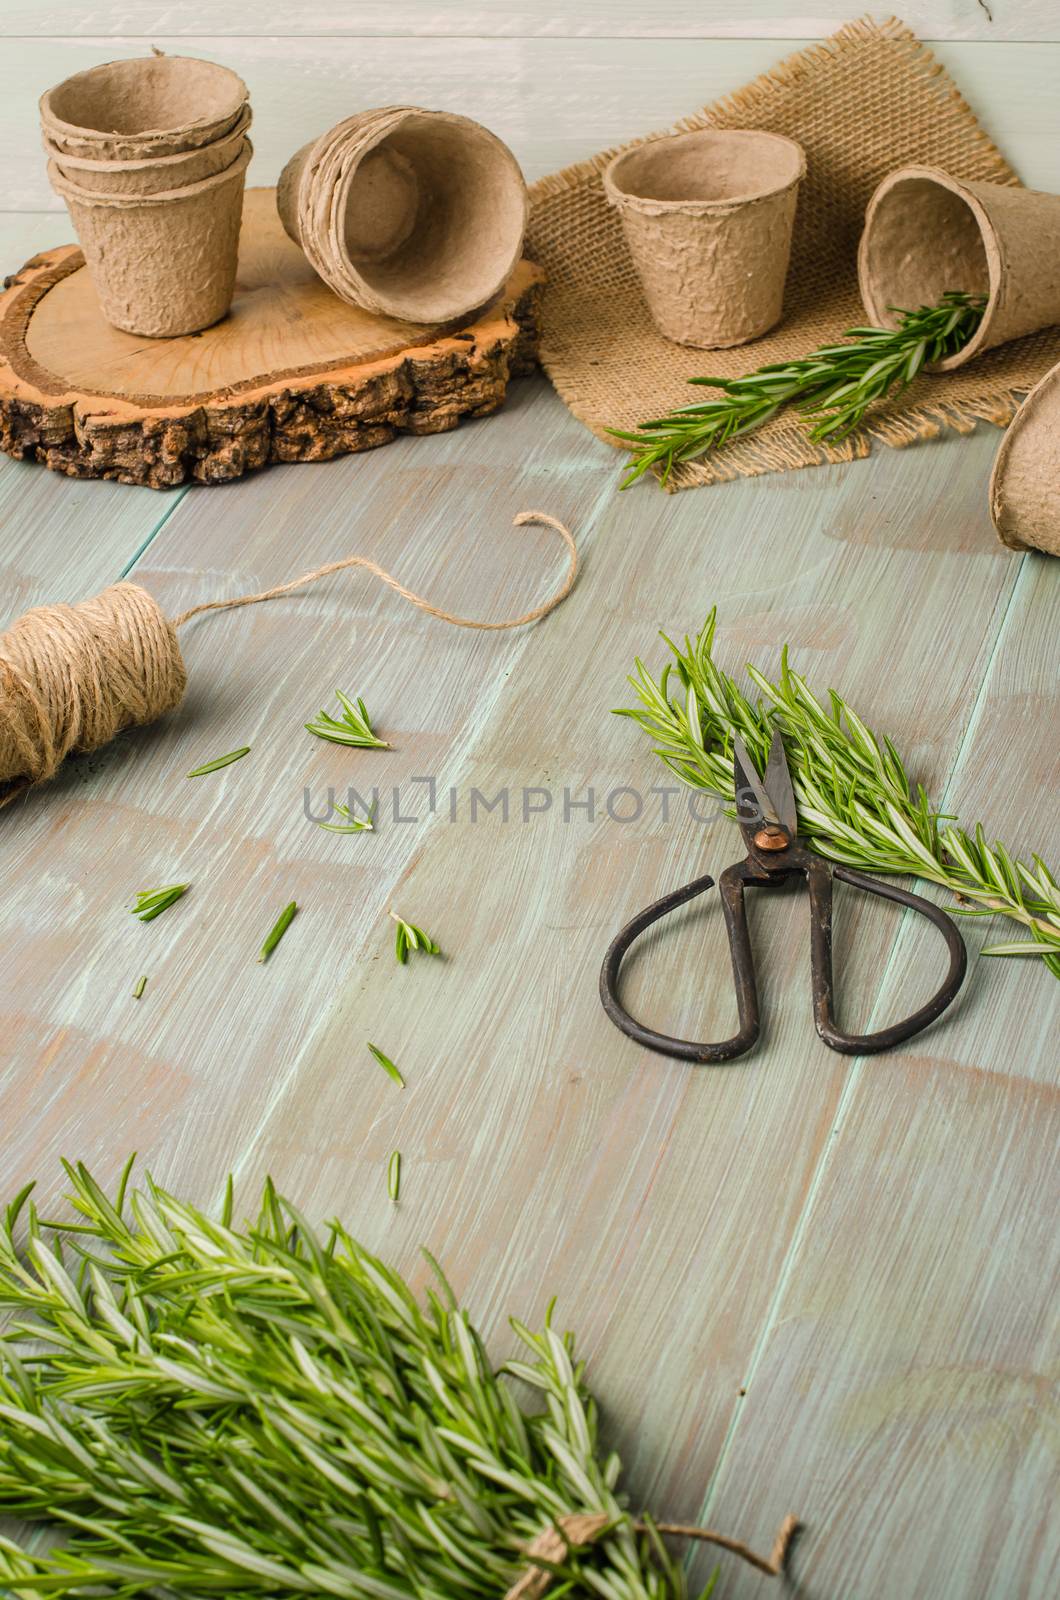 Rosemary for planting with garden tools on wooden table